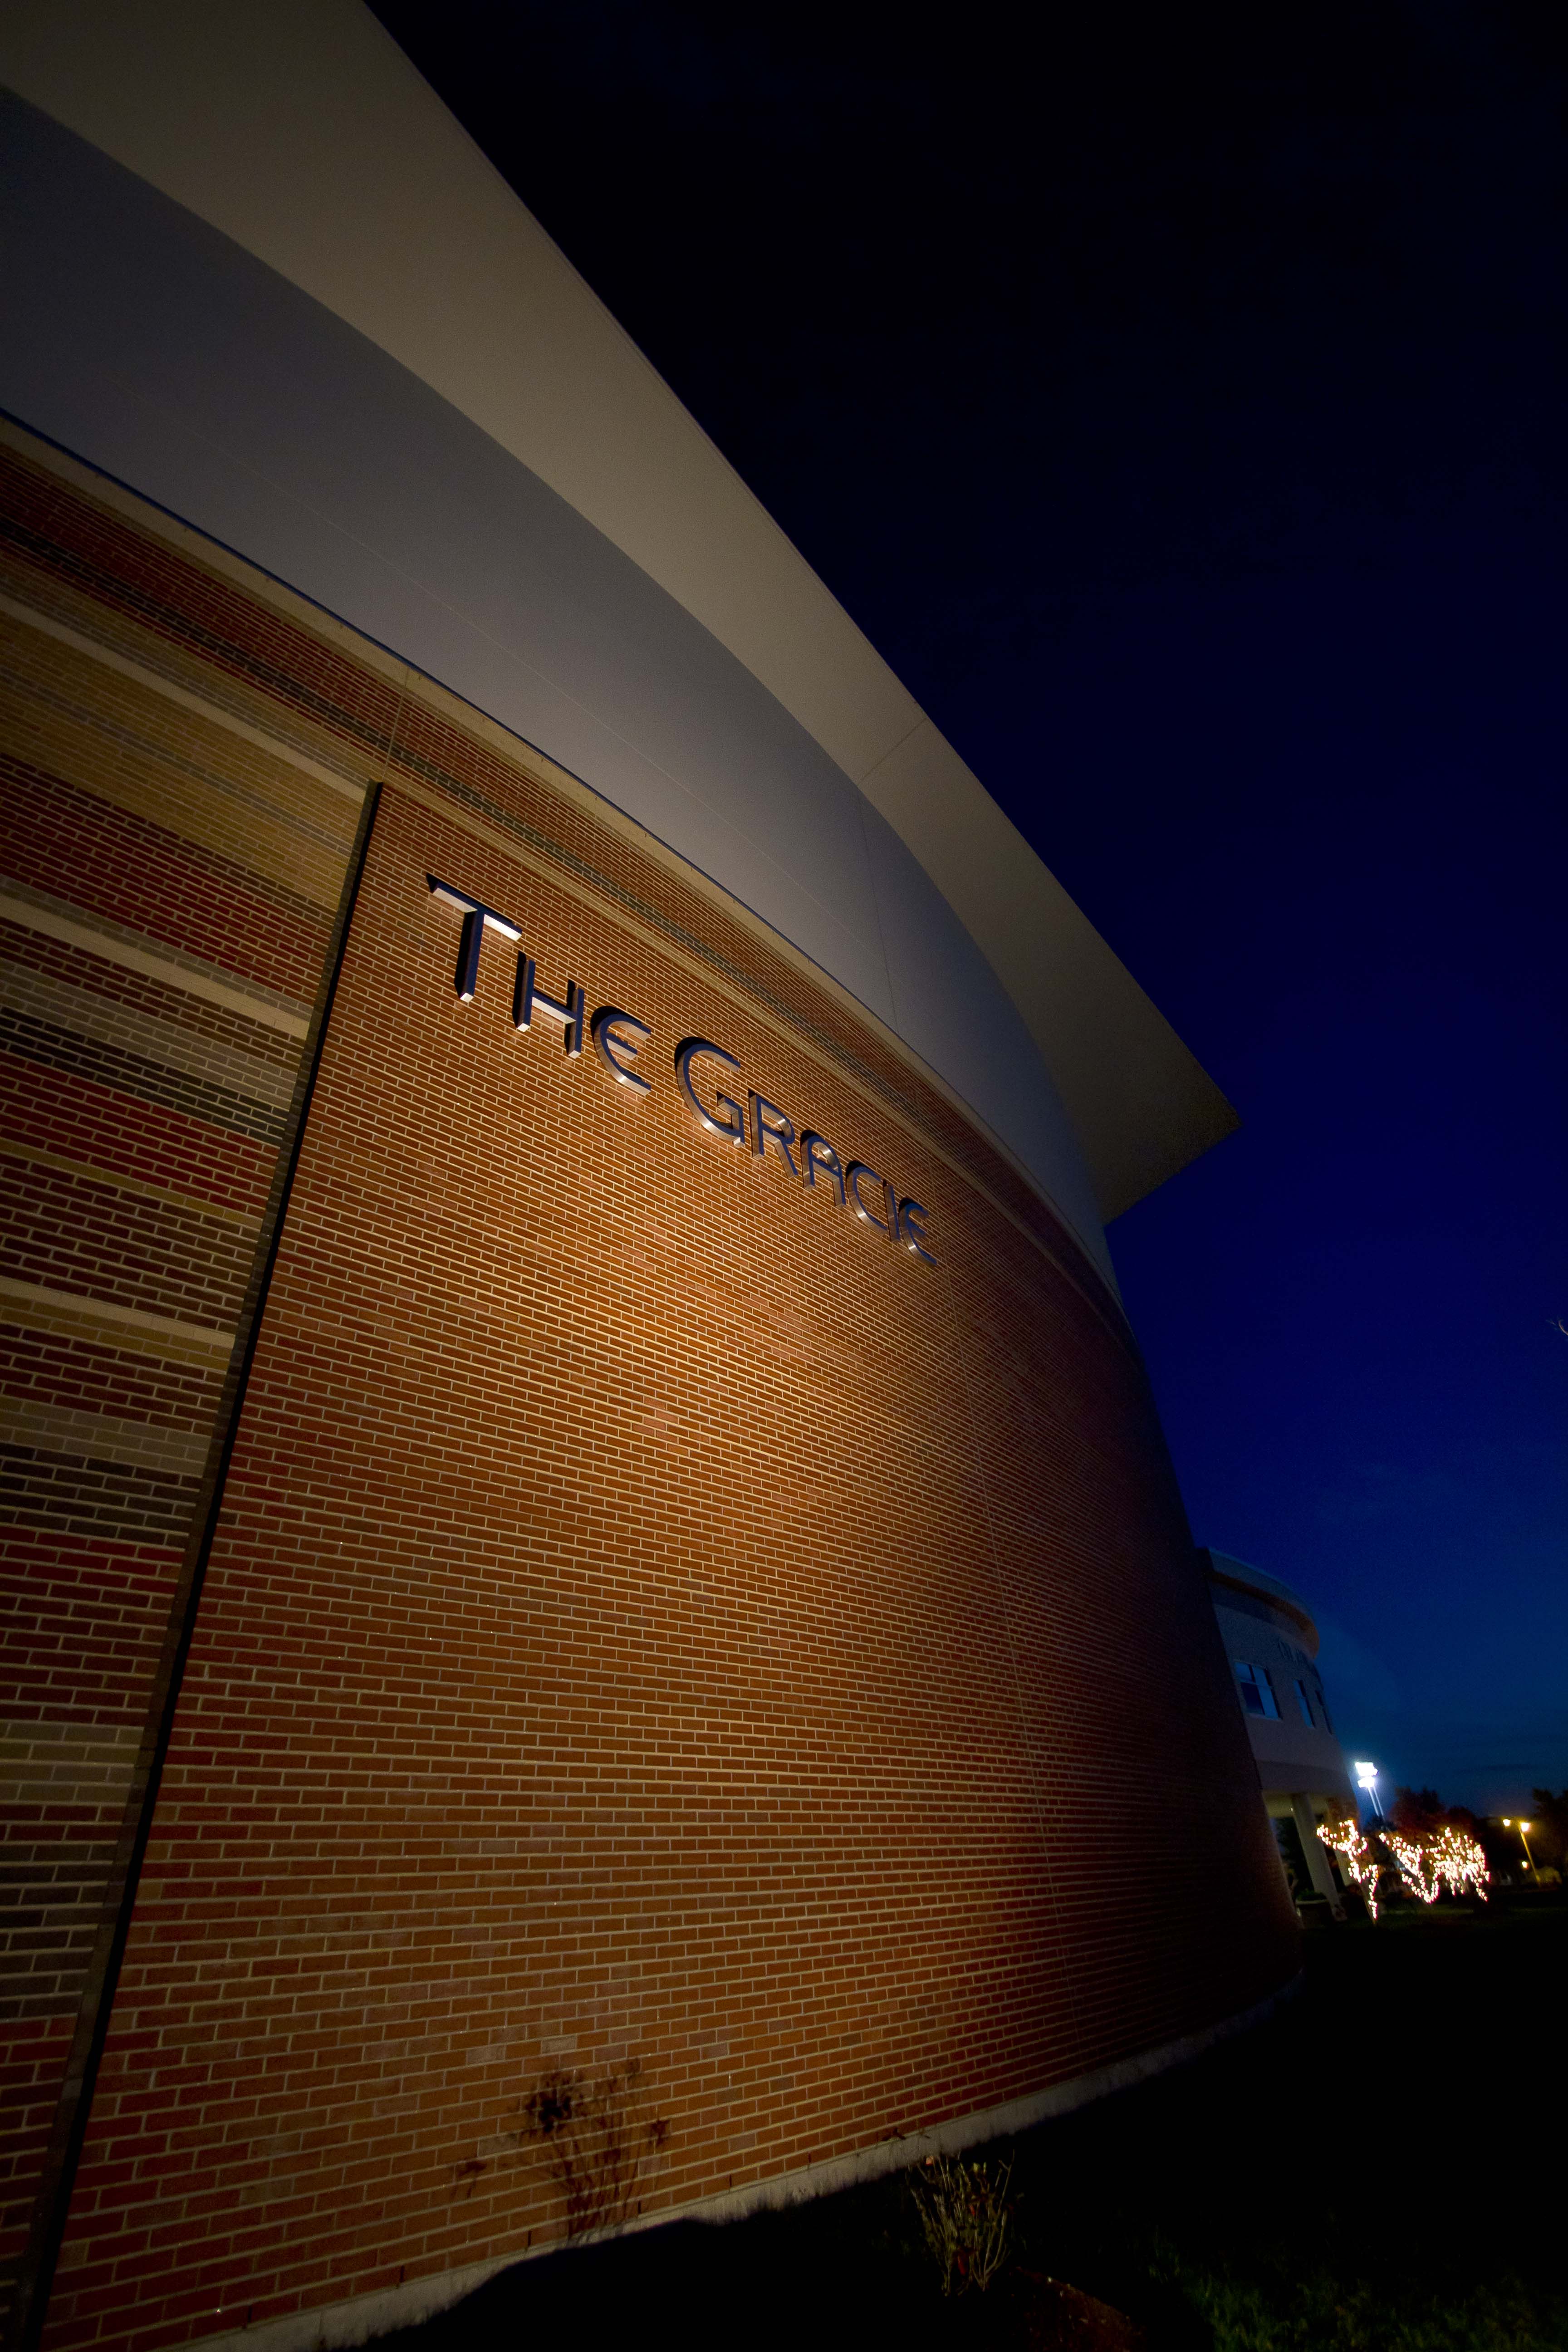 The Gracie Theatre is Husson University's center for the fine and performing arts.